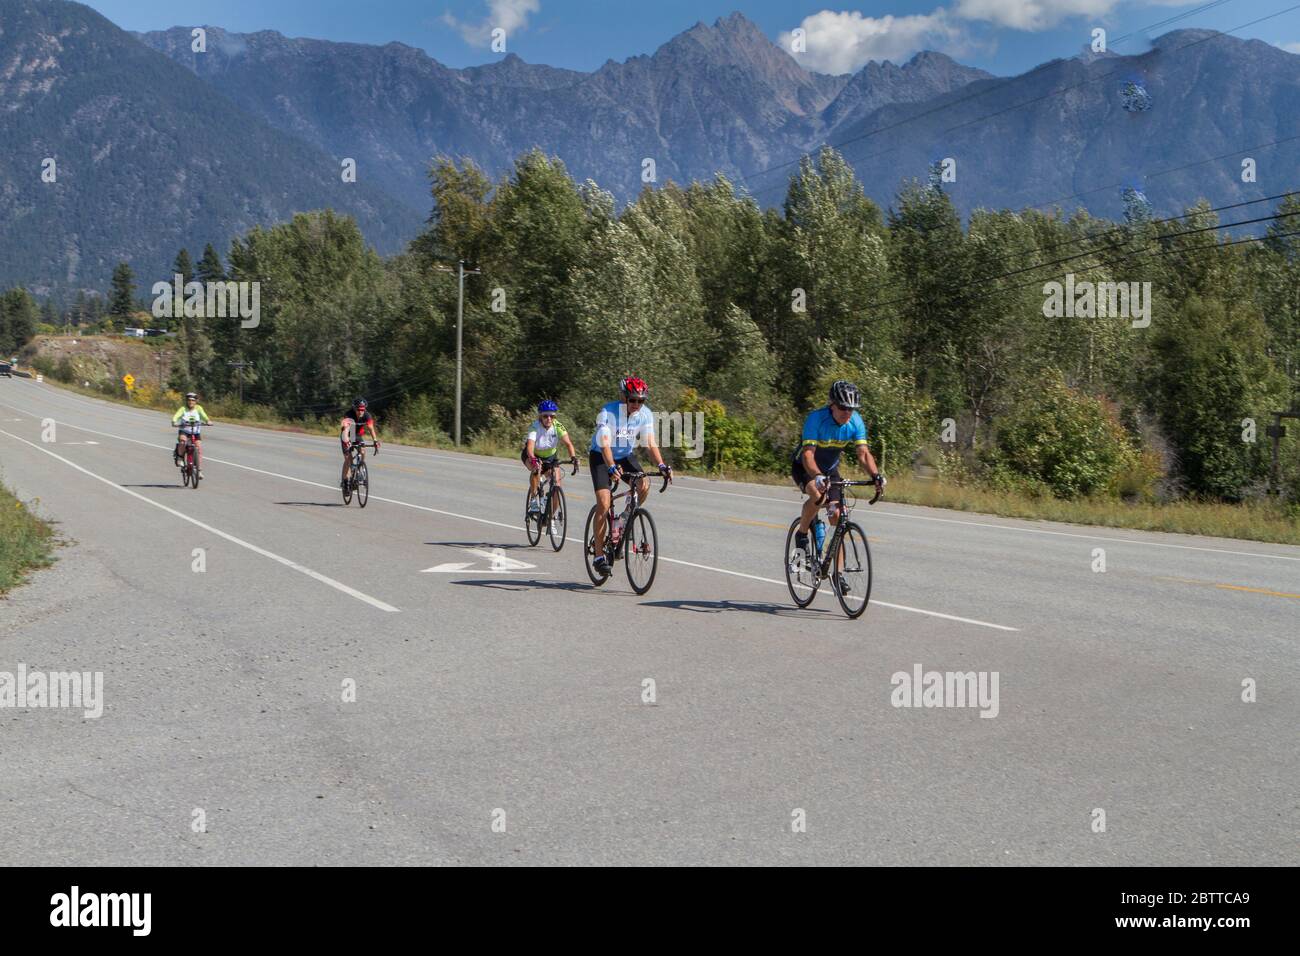 Scenic Bike Race, 2 riders, in full racing gear and uniform. Race goes thru farmland and the mountains. Stock Photo